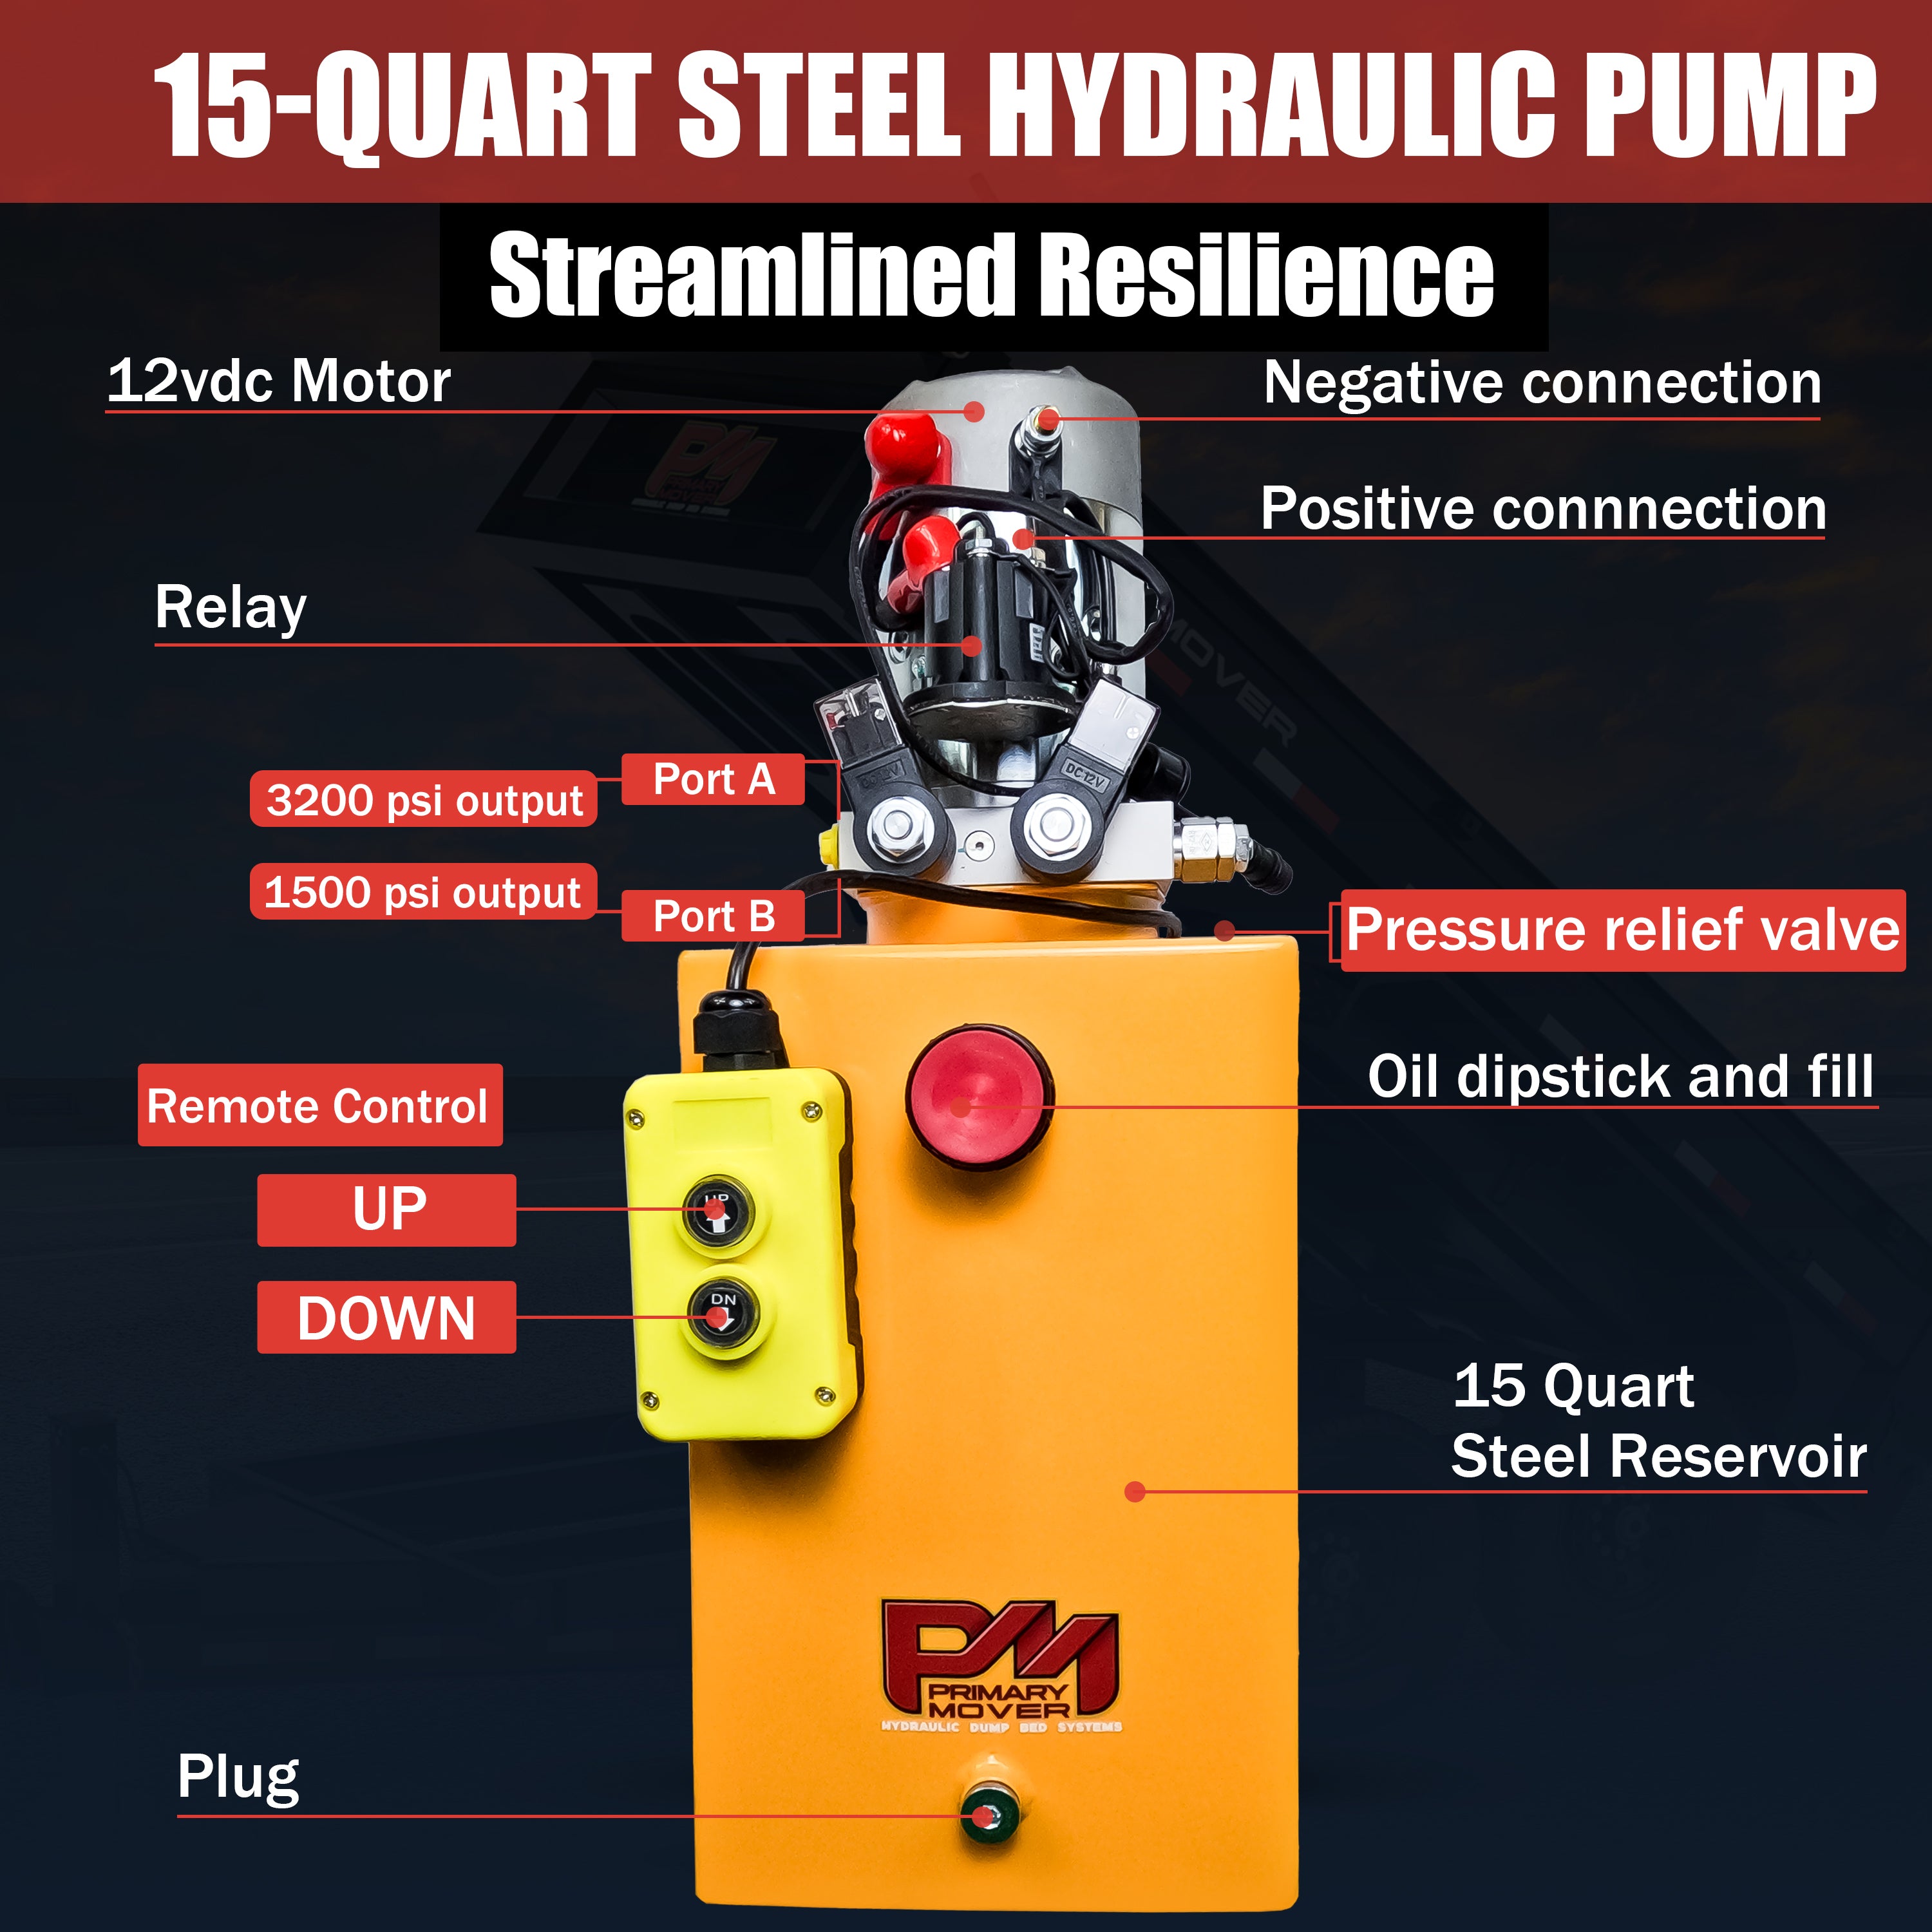 Primary Mover Double Acting 12VDC Hydraulic Power Unit with dual-acting precision for hydraulic dump bed systems. Crafted for efficiency and reliability, featuring steel reservoirs and a hand-held pendant for optimal performance.